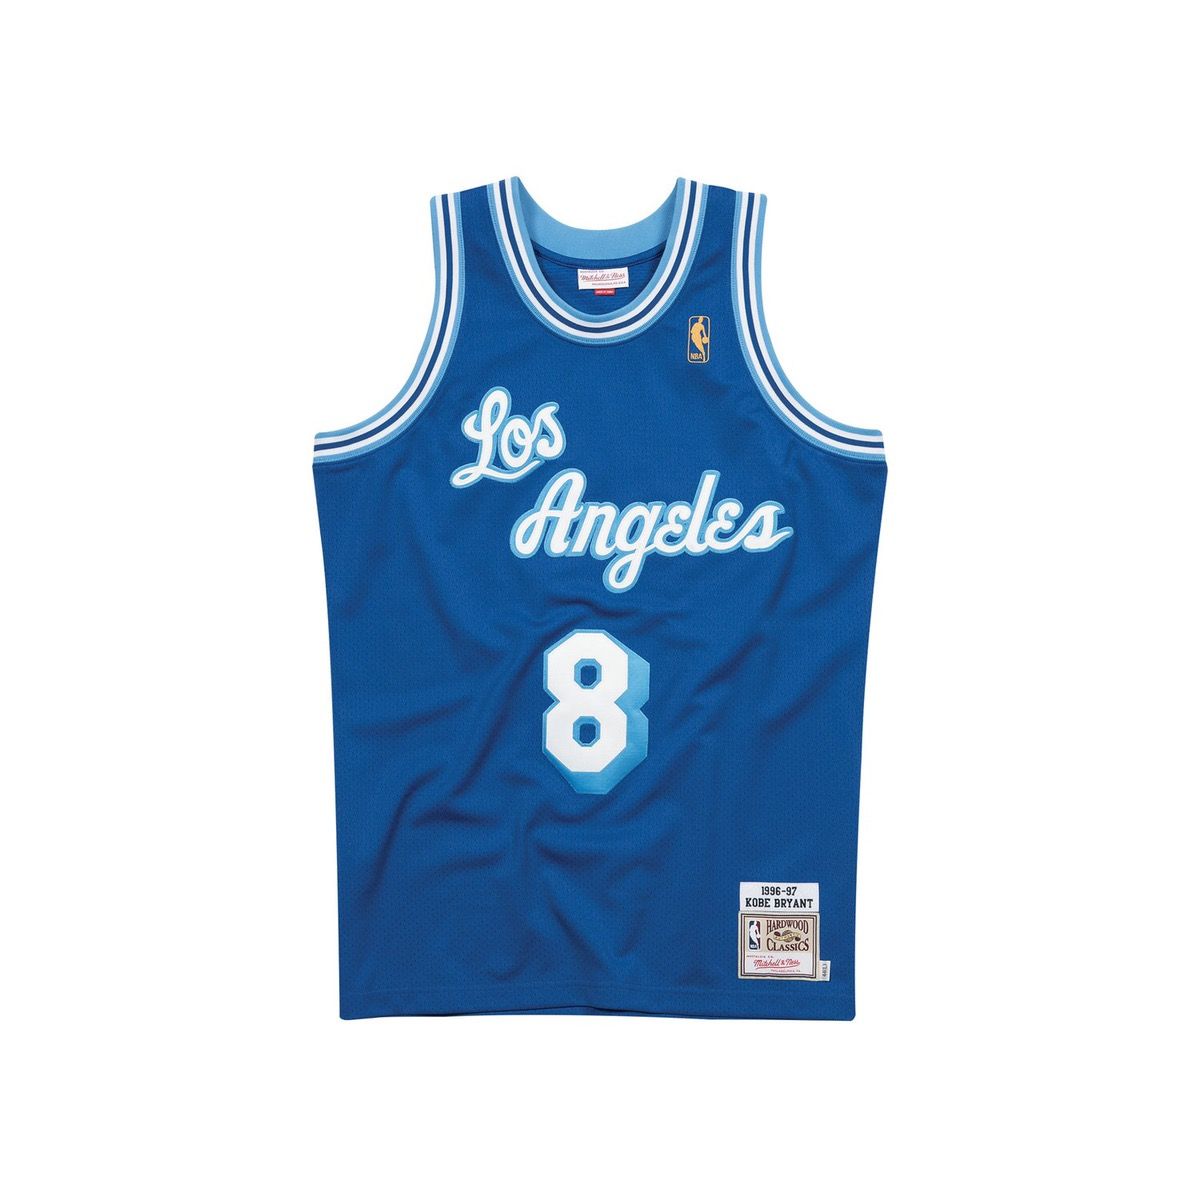 Mitchell & Ness NBA AUTHENTIC JERSEY LOS ANGELES LAKERS 1996-97 KOBE BRYANT  #8 Blue - royal